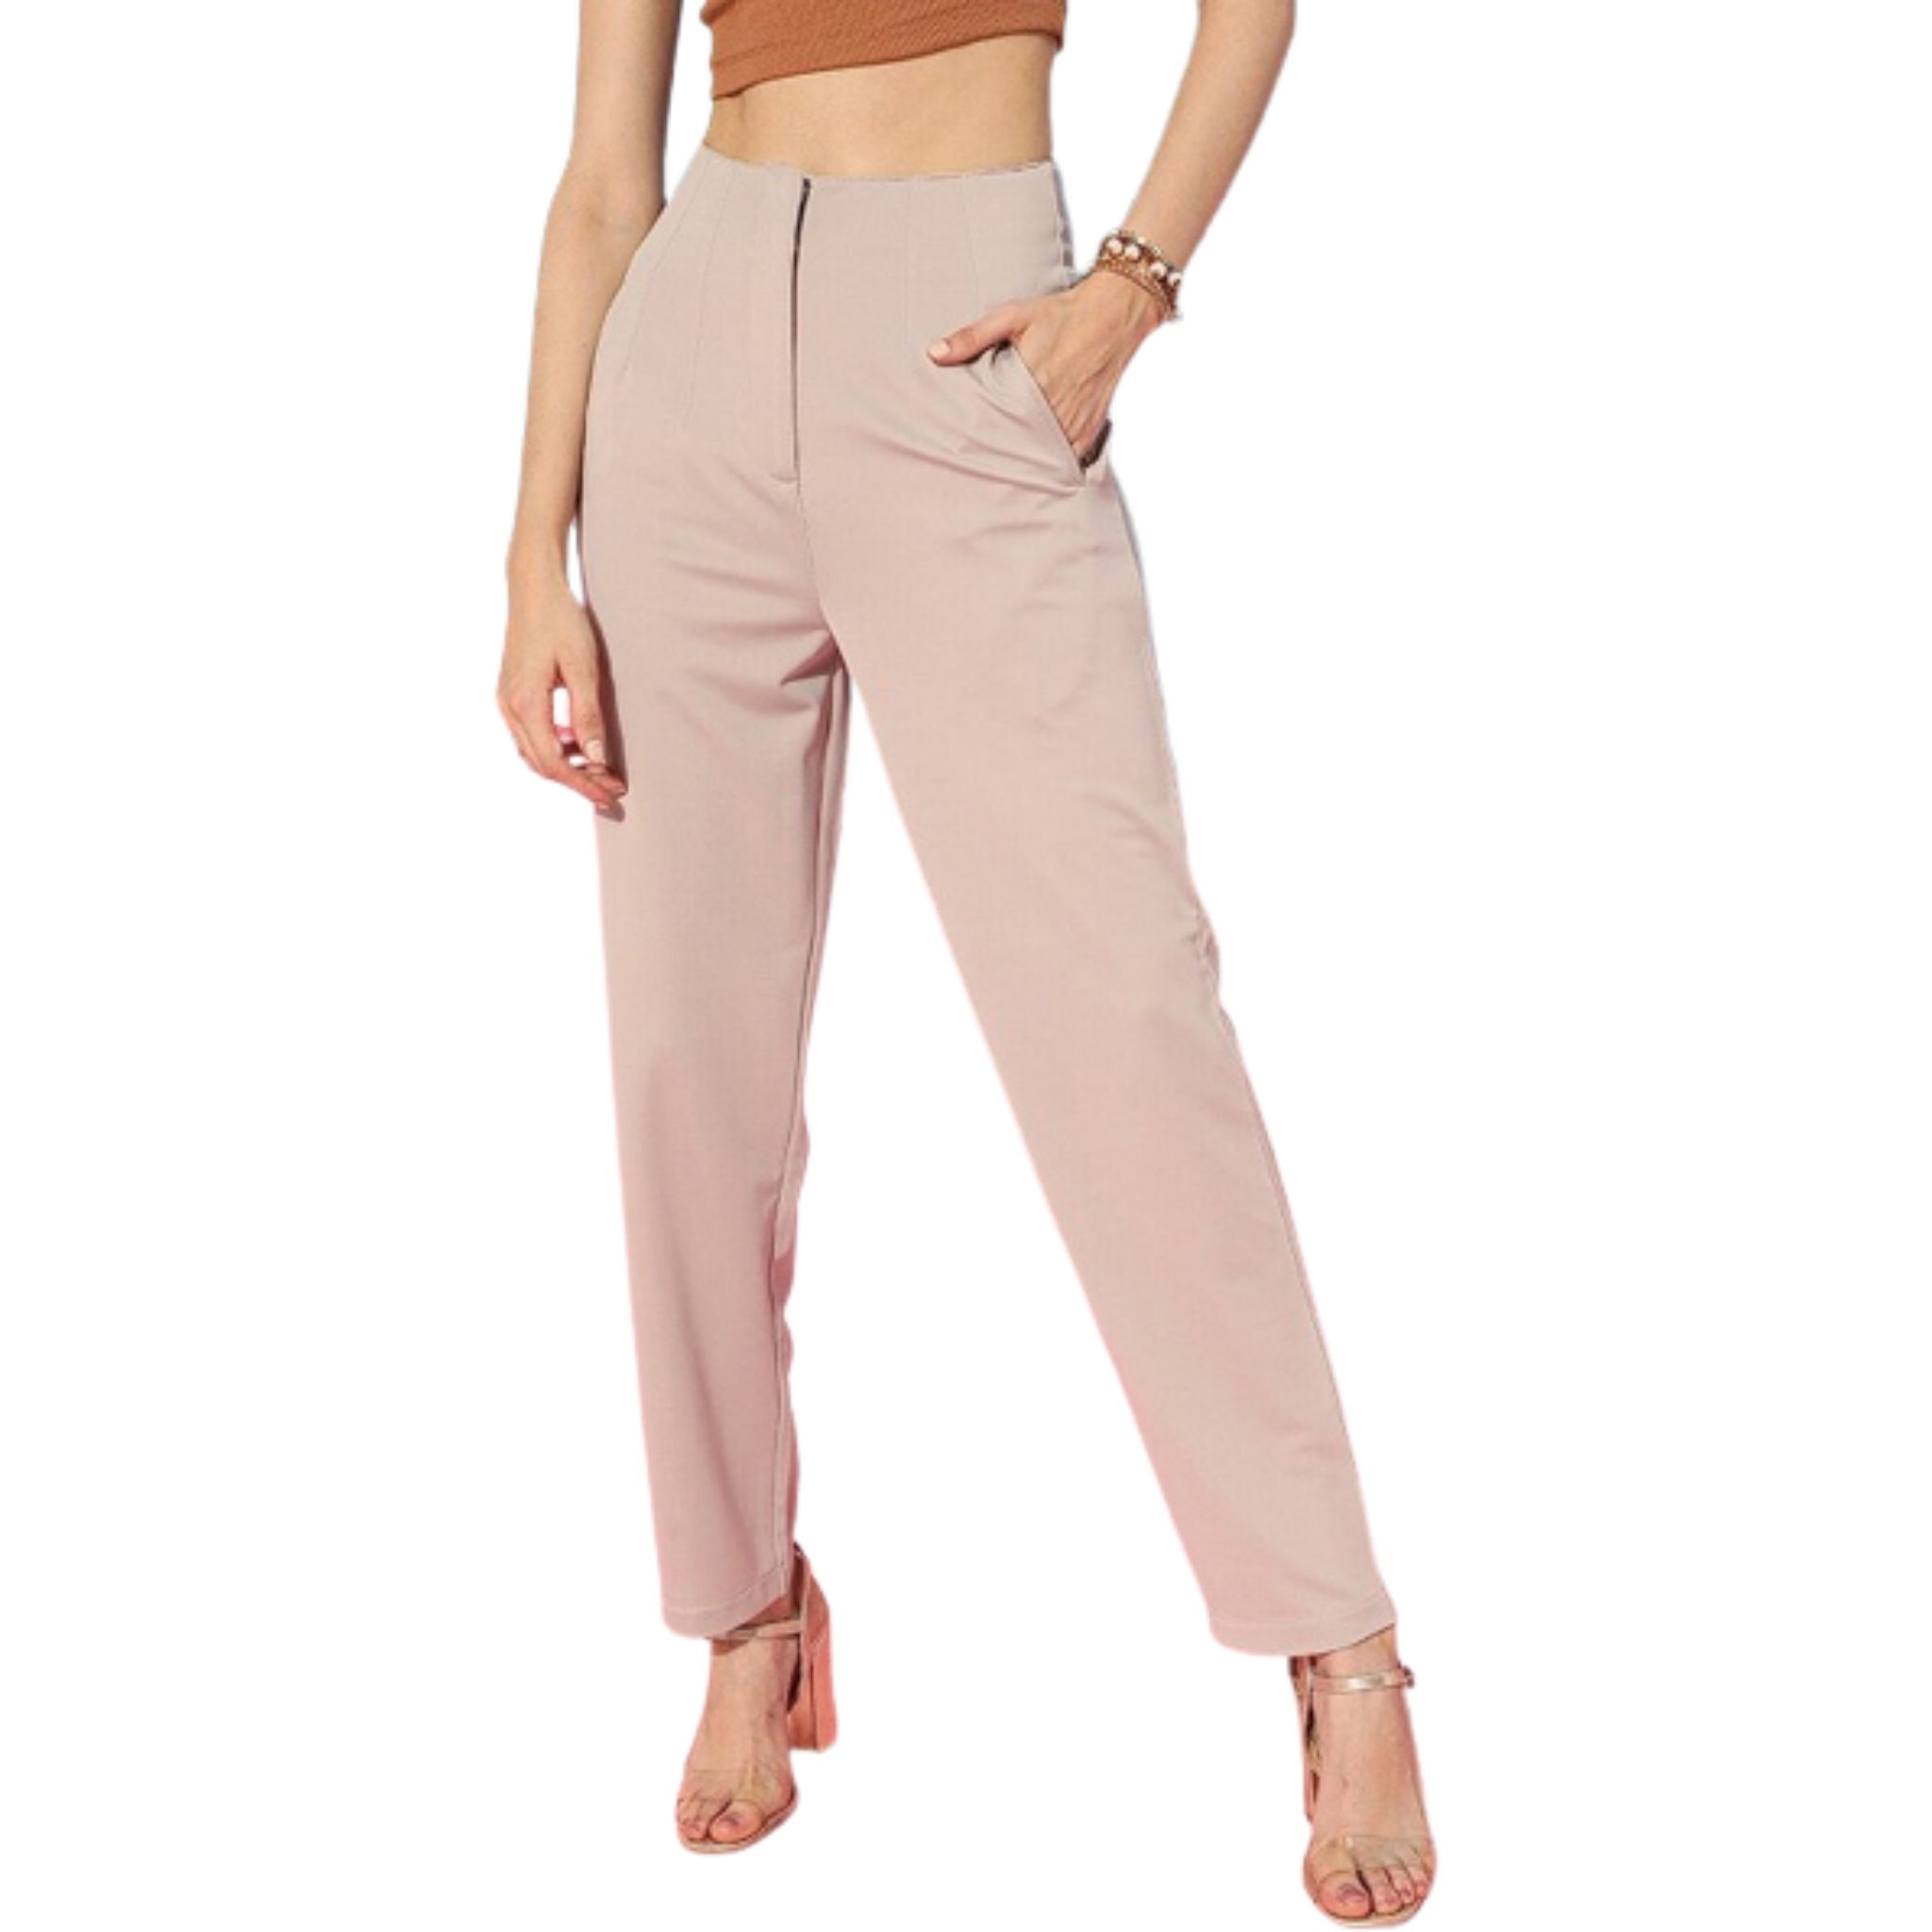 Wide-leg trousers are trending right now and these are our favourites |  Wide leg trousers outfit, Black wide leg trousers outfit, Wide leg trousers  outfit casual